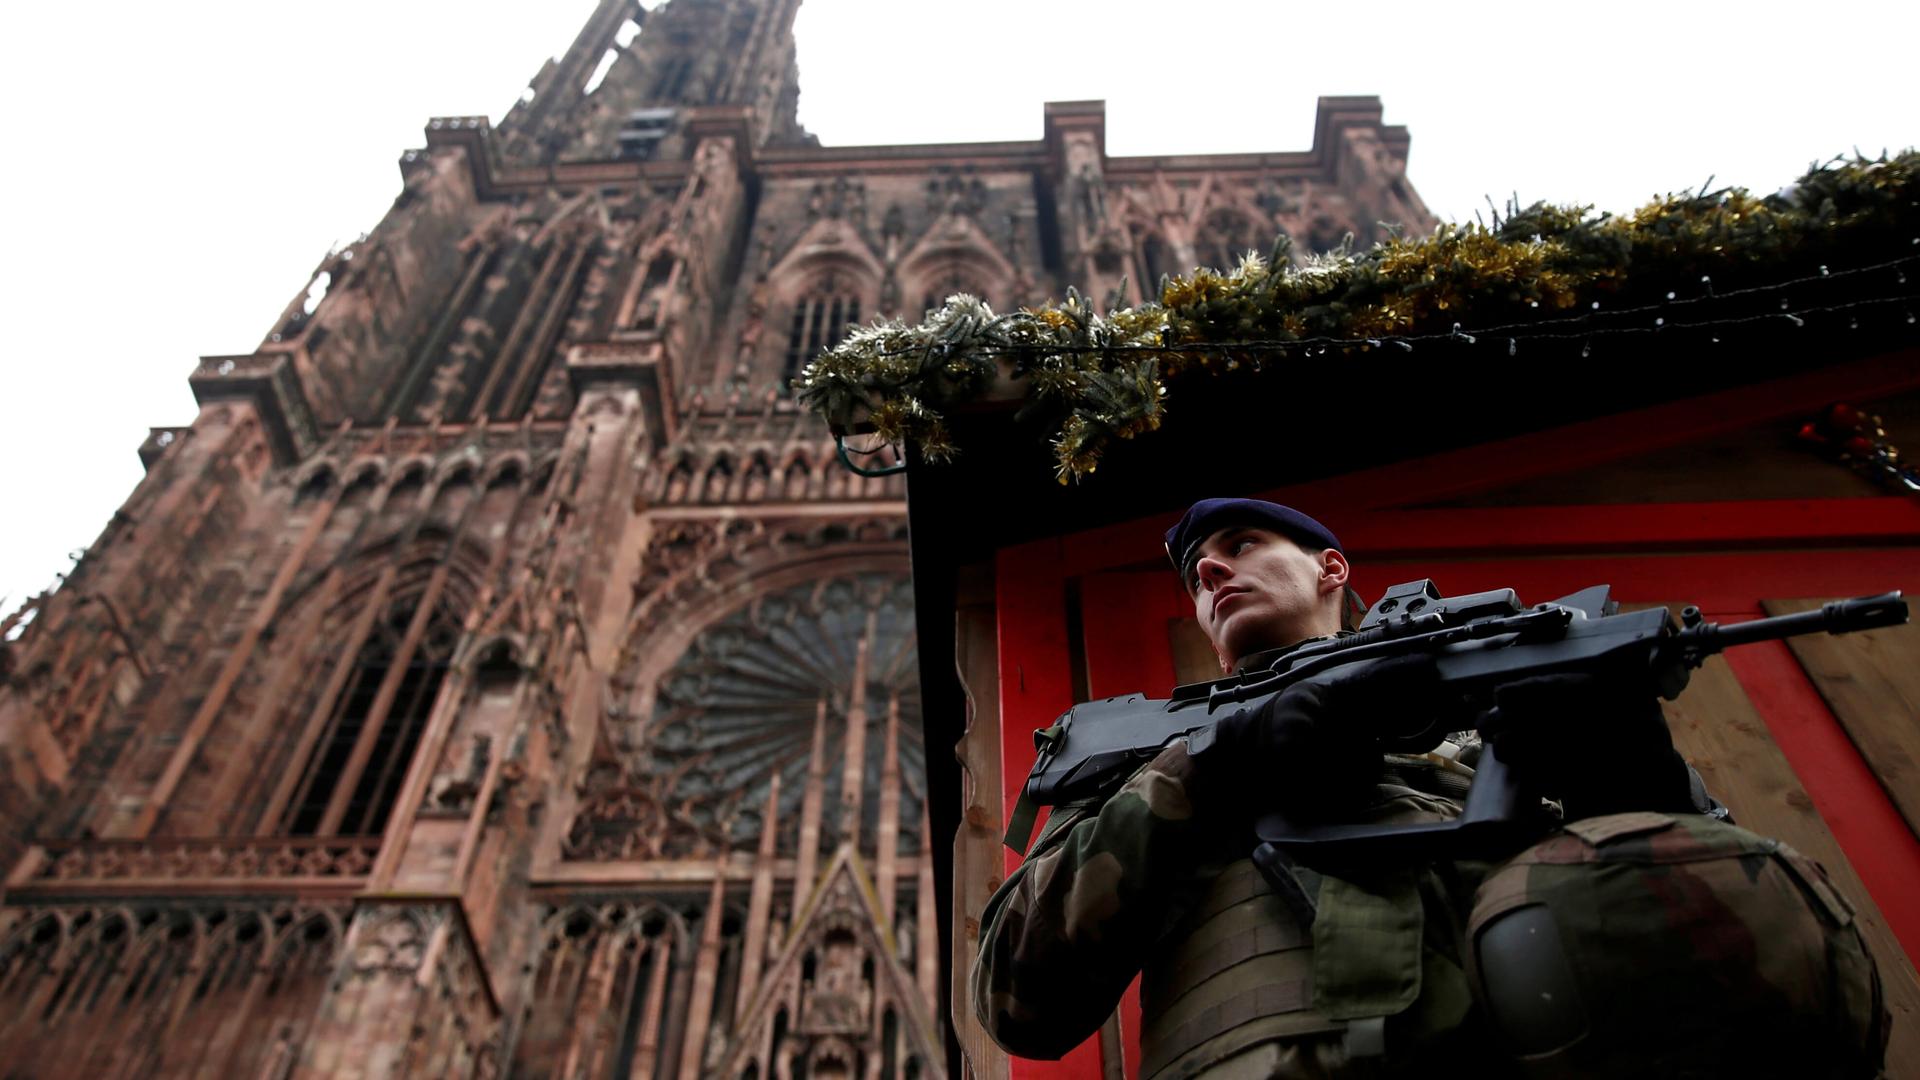 A soldier with a gun stands guard in front of a looming Cathedral.